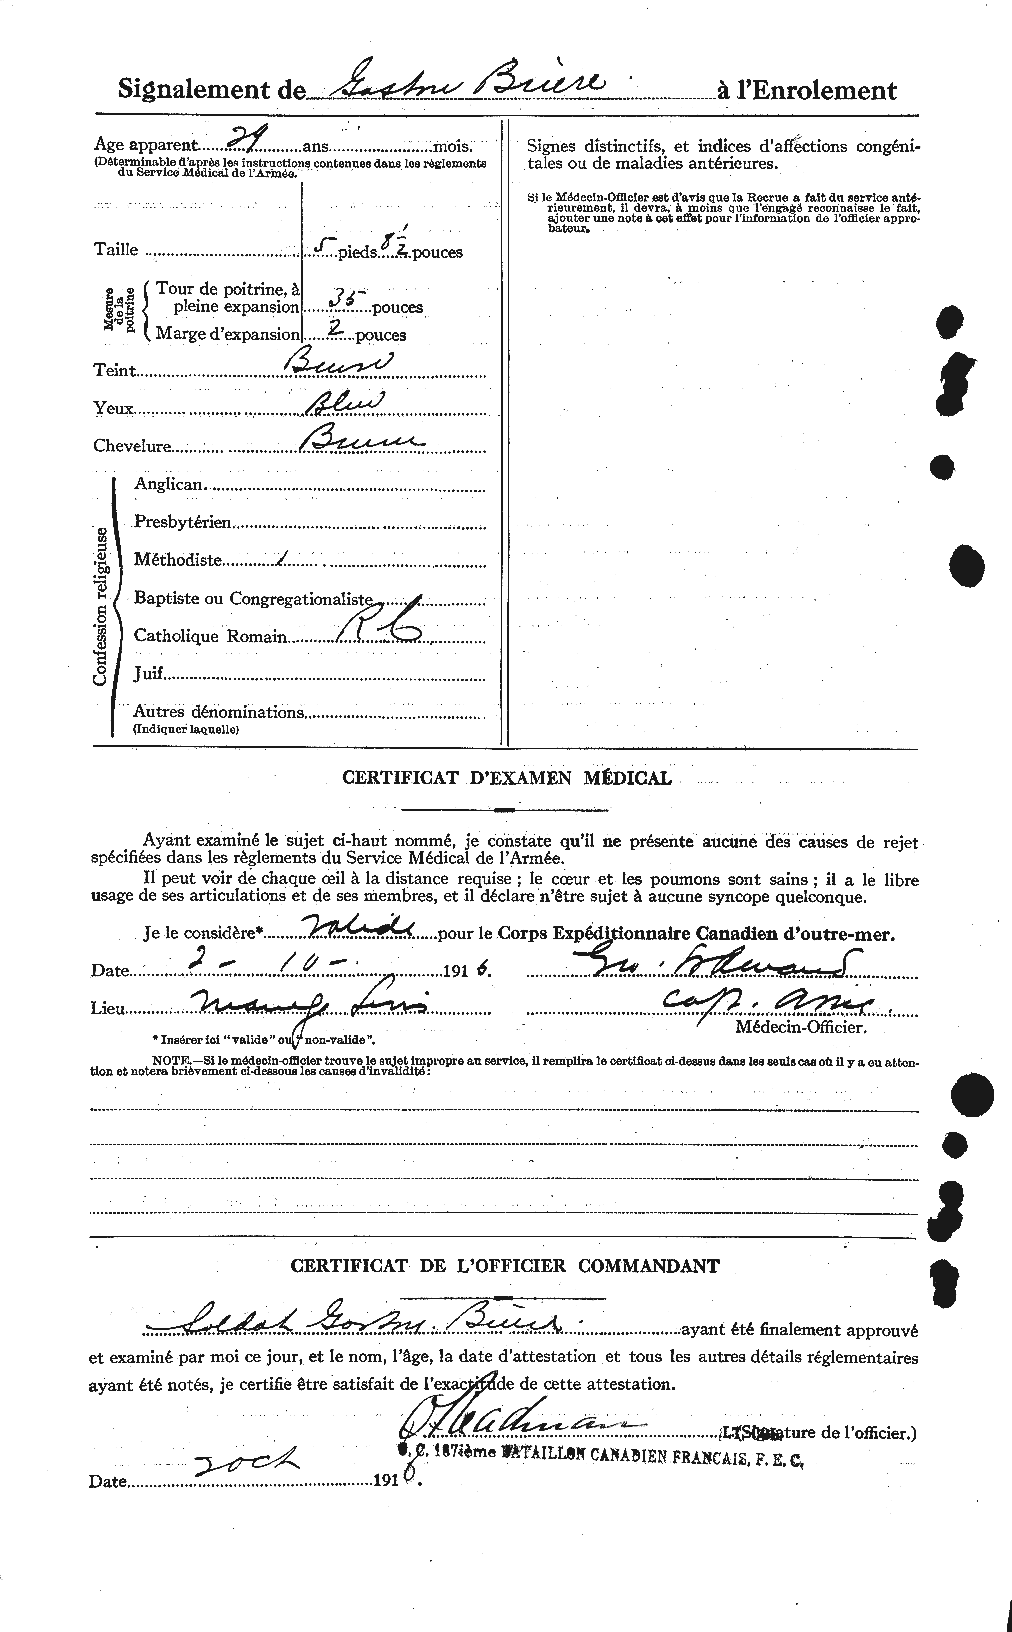 Personnel Records of the First World War - CEF 259973b